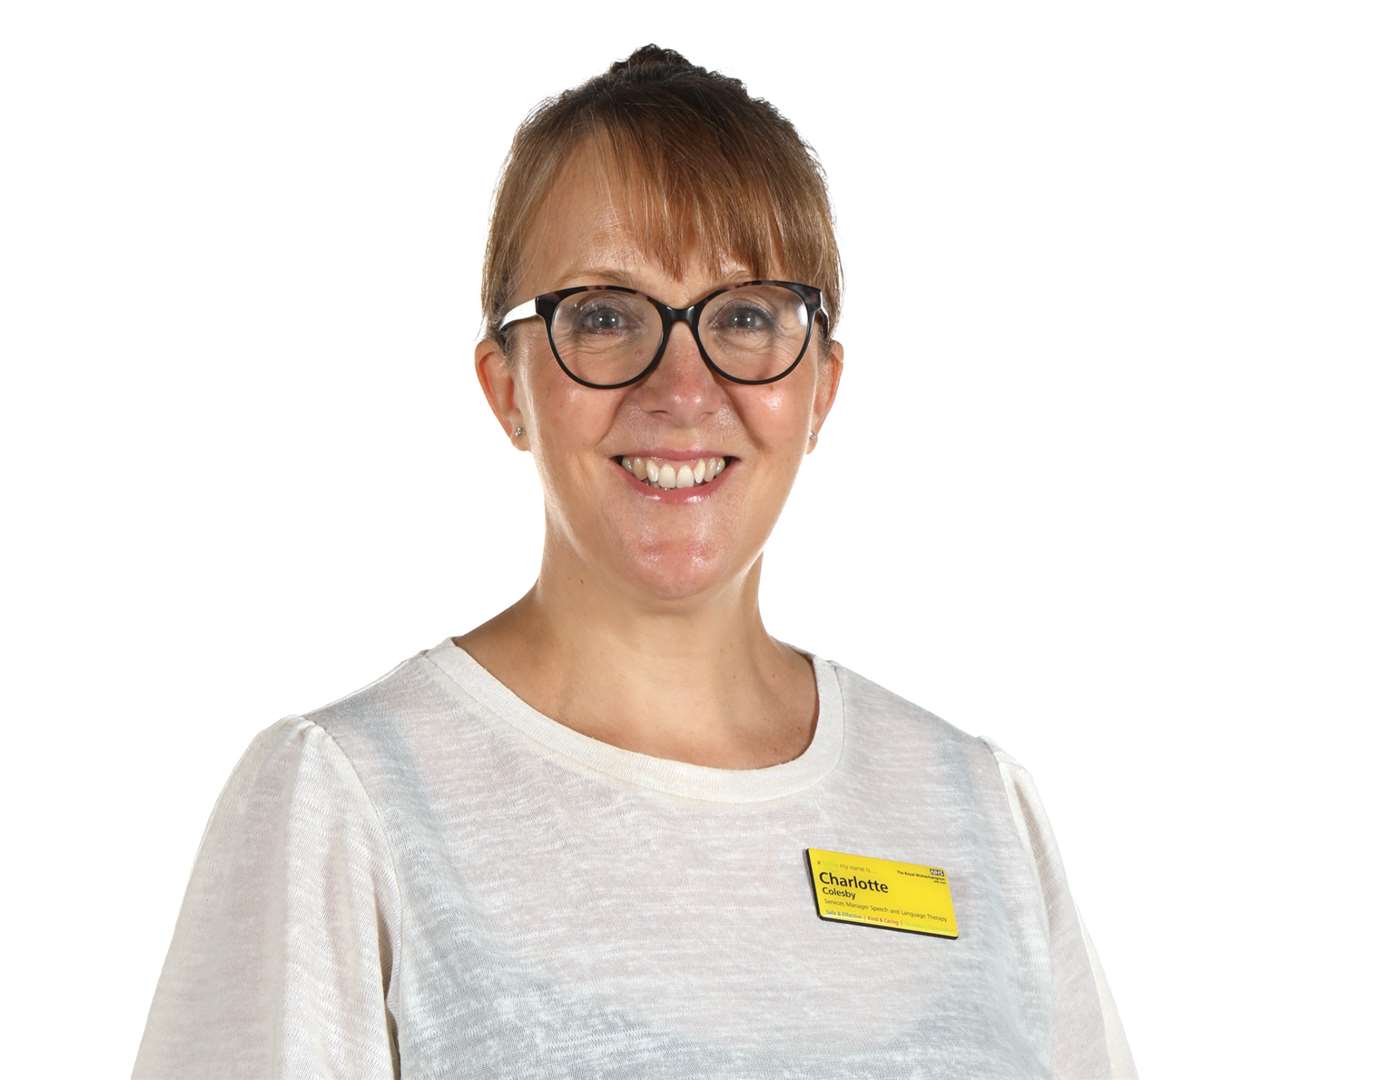 Charlotte Colesby has been a speech and language therapist since she qualified in 1991 (Royal Wolverhampton NHS Trust/PA)